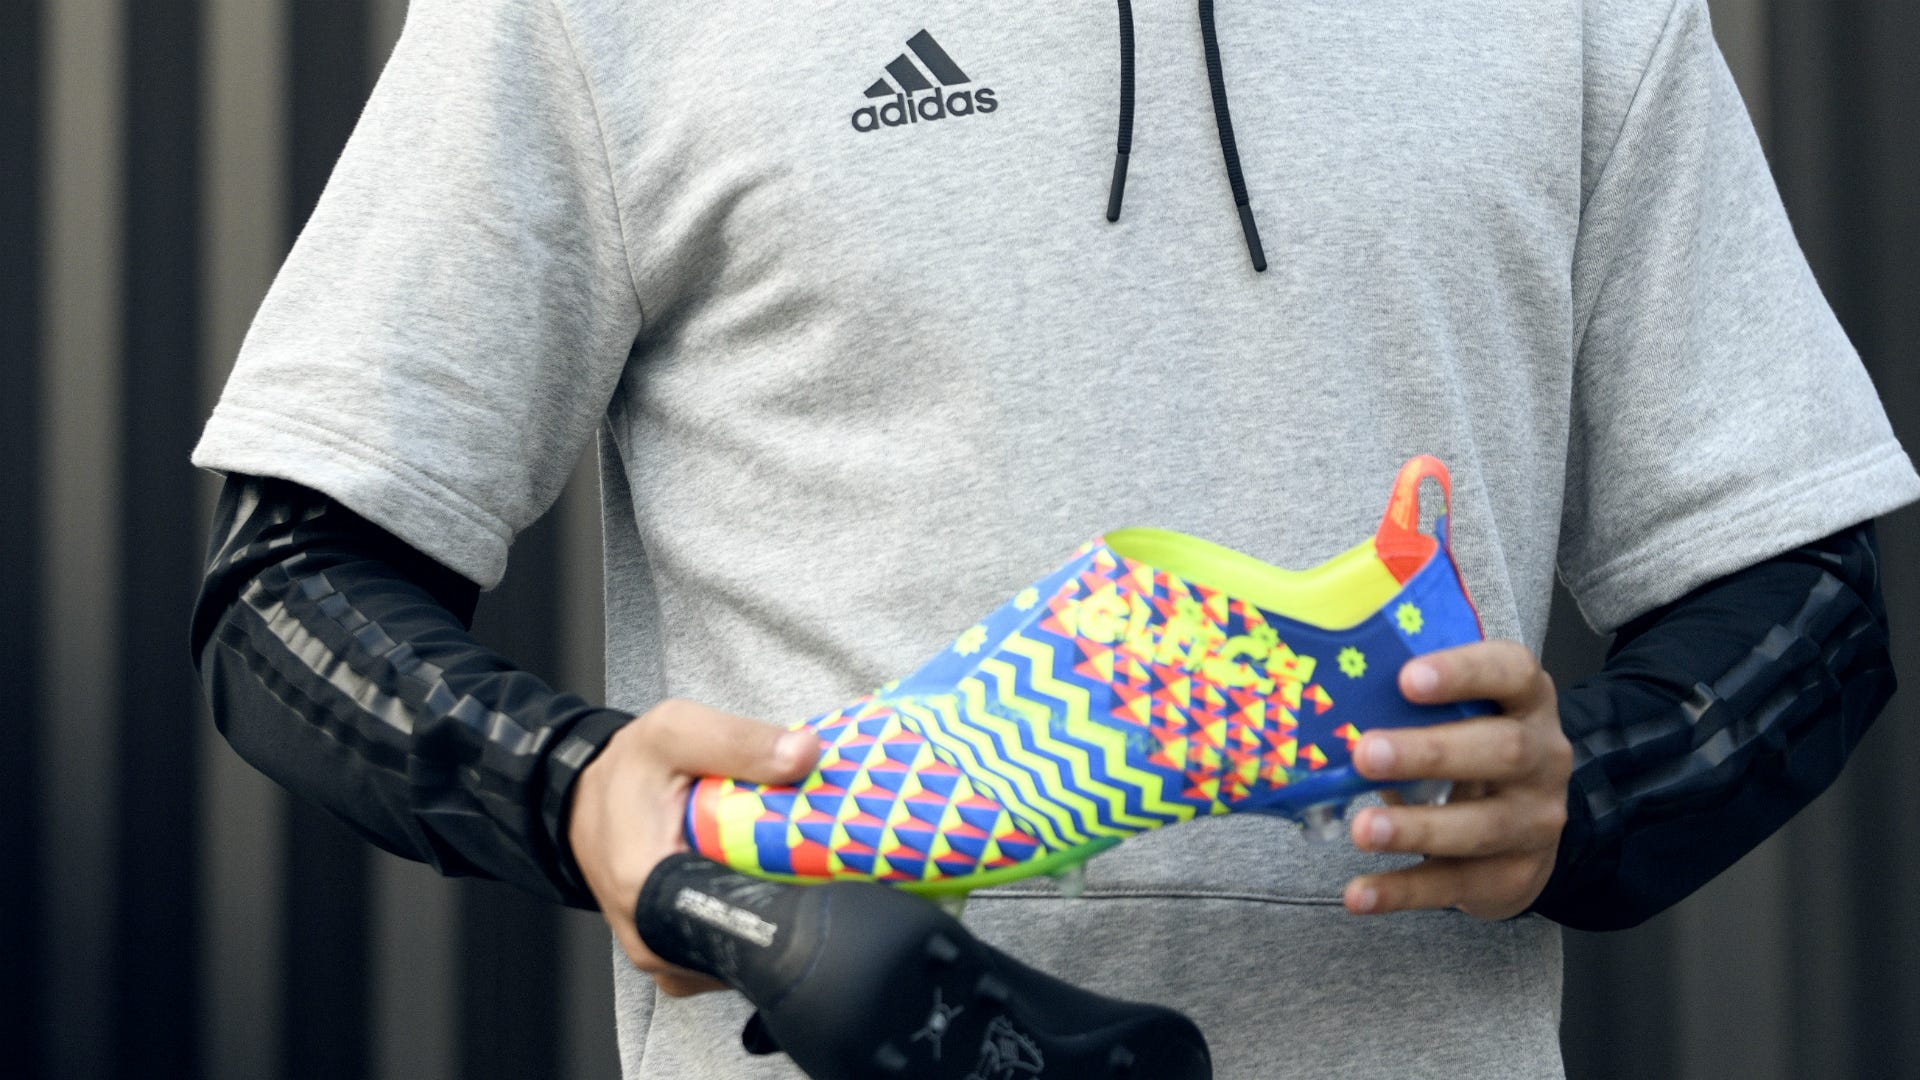 Extreme Sea bream Weaken Paulo Dybala signs on with adidas before World Cup | Goal.com English Qatar